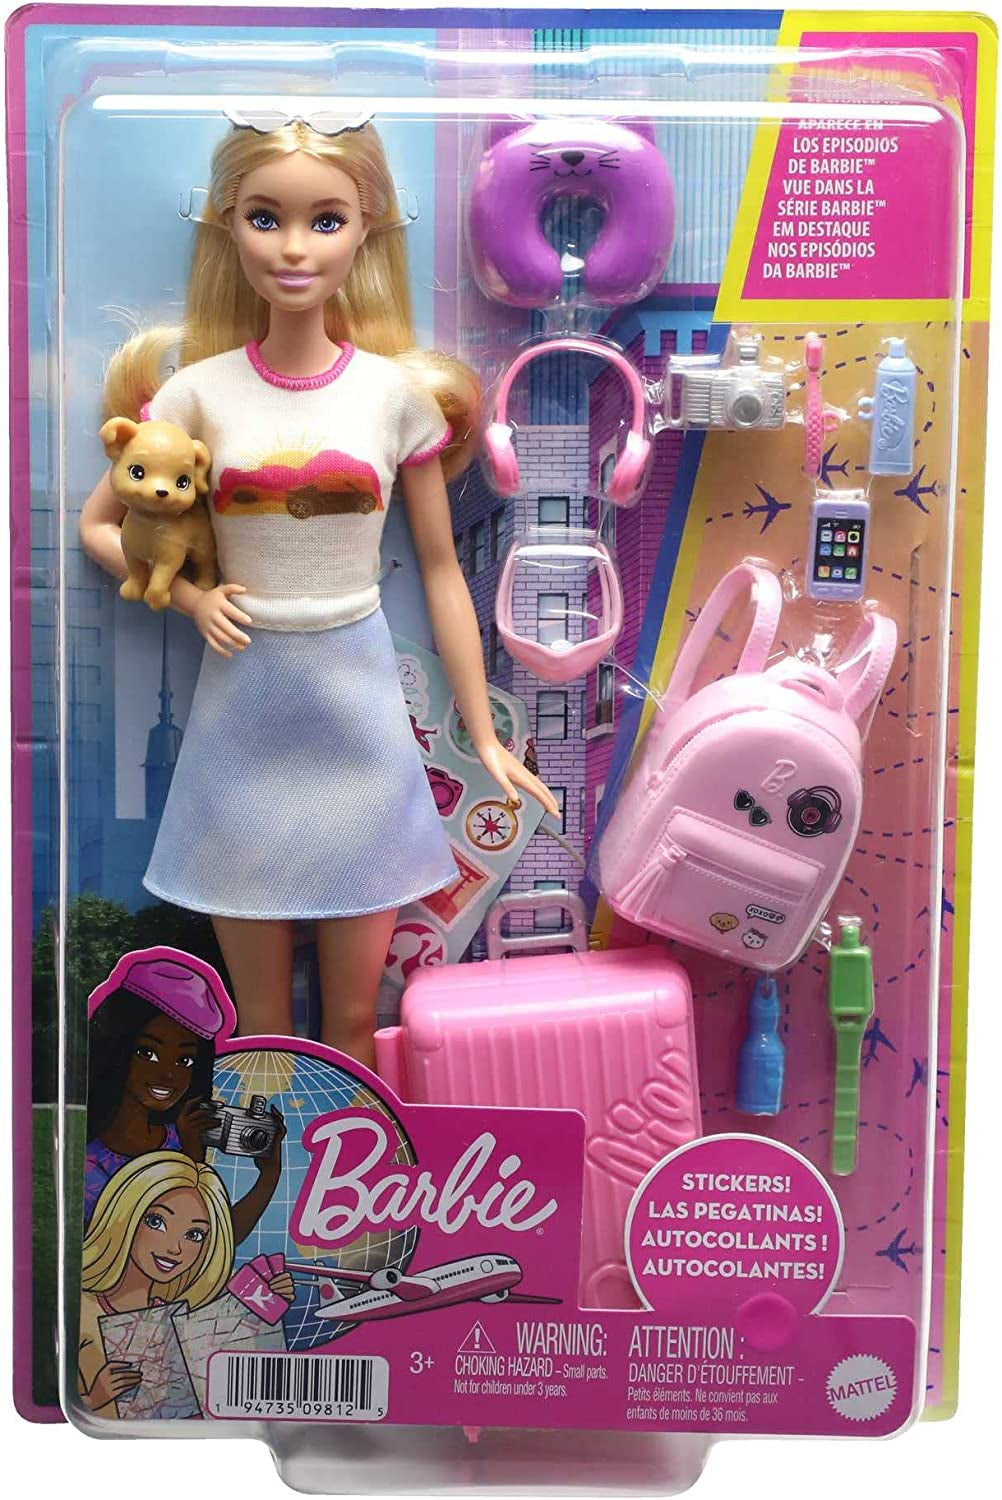 Doll and Accessories, “Malibu” Travel Set with Puppy and 10+ Pieces Including Working Suitcase, HJY18